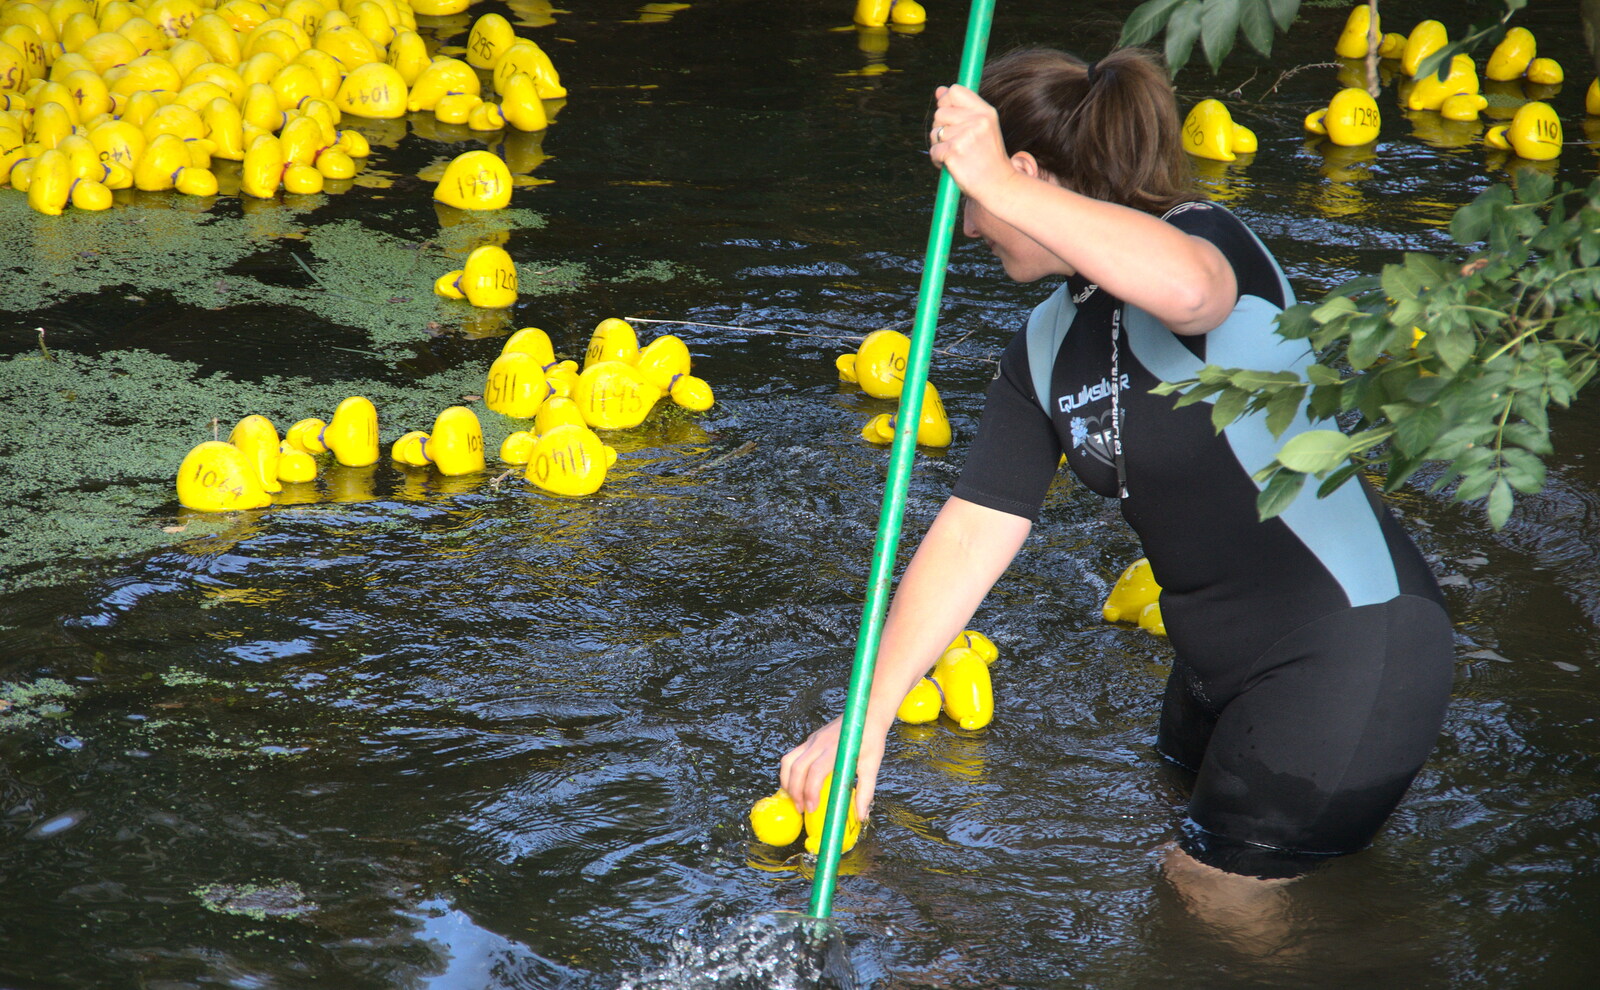 Ducks are coralled at the start line from Gislingham Silver Band and the Duck Race, The Pennings, Eye, Suffolk - 29th September 2018